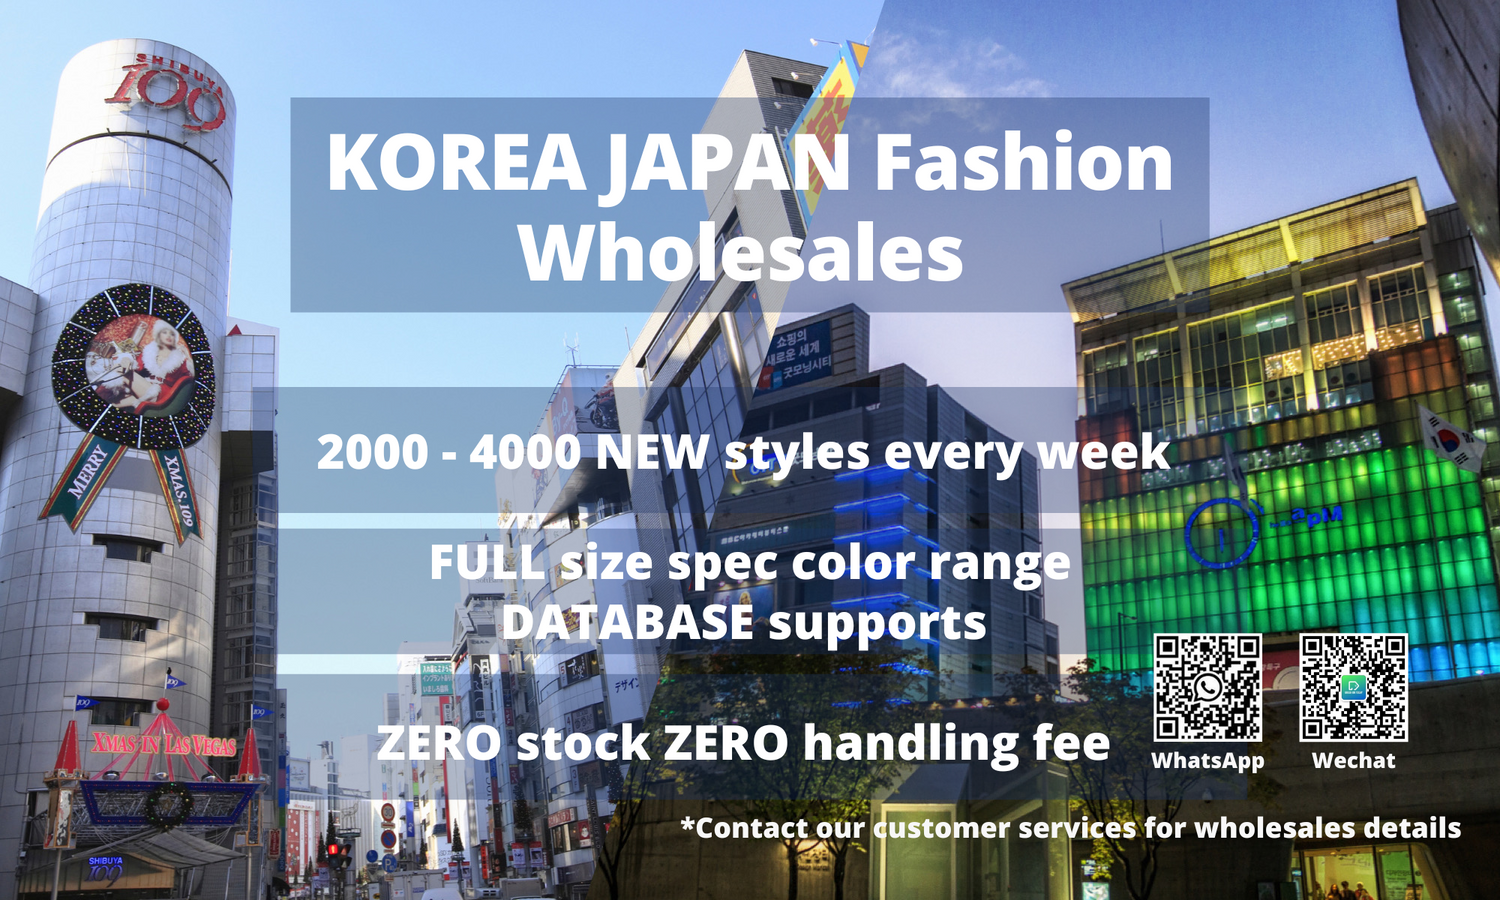 Online Korean fashion wholesaler offering full size data, zero-inventory model, and diverse, quality styles.